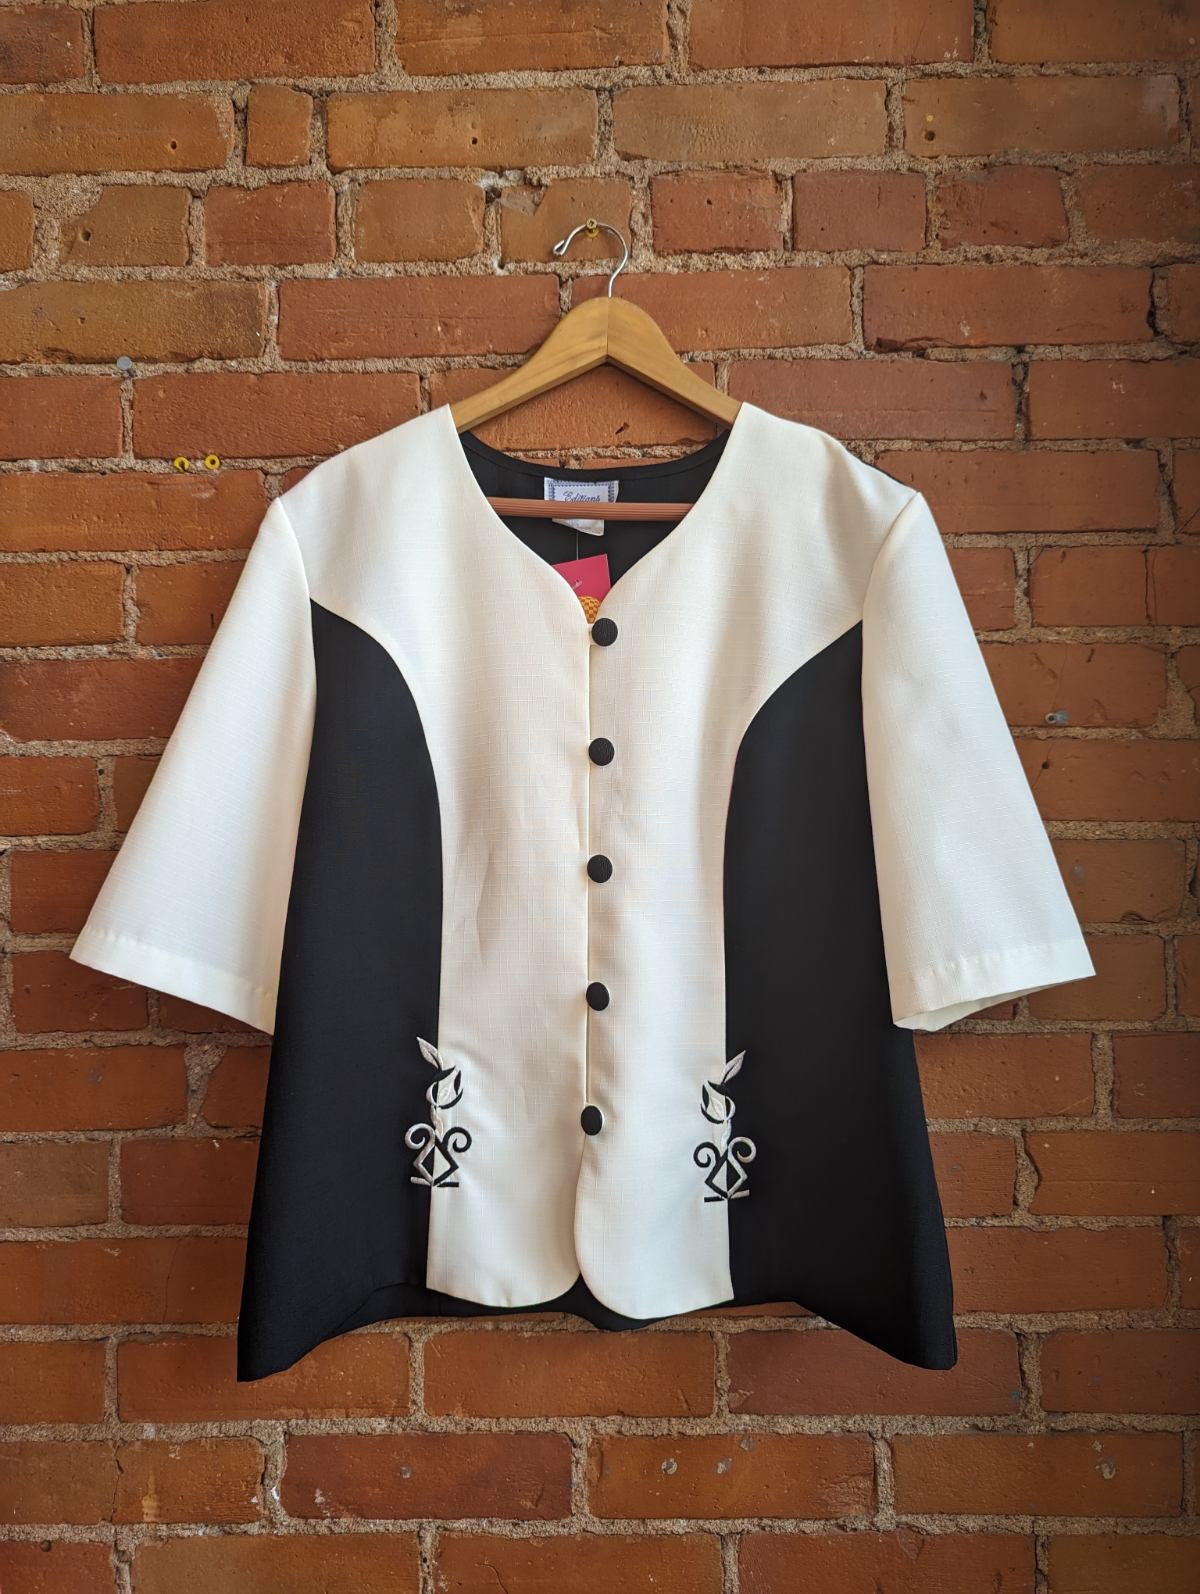 1980s Editions Black and White Button-Up Short Sleeve Jacket